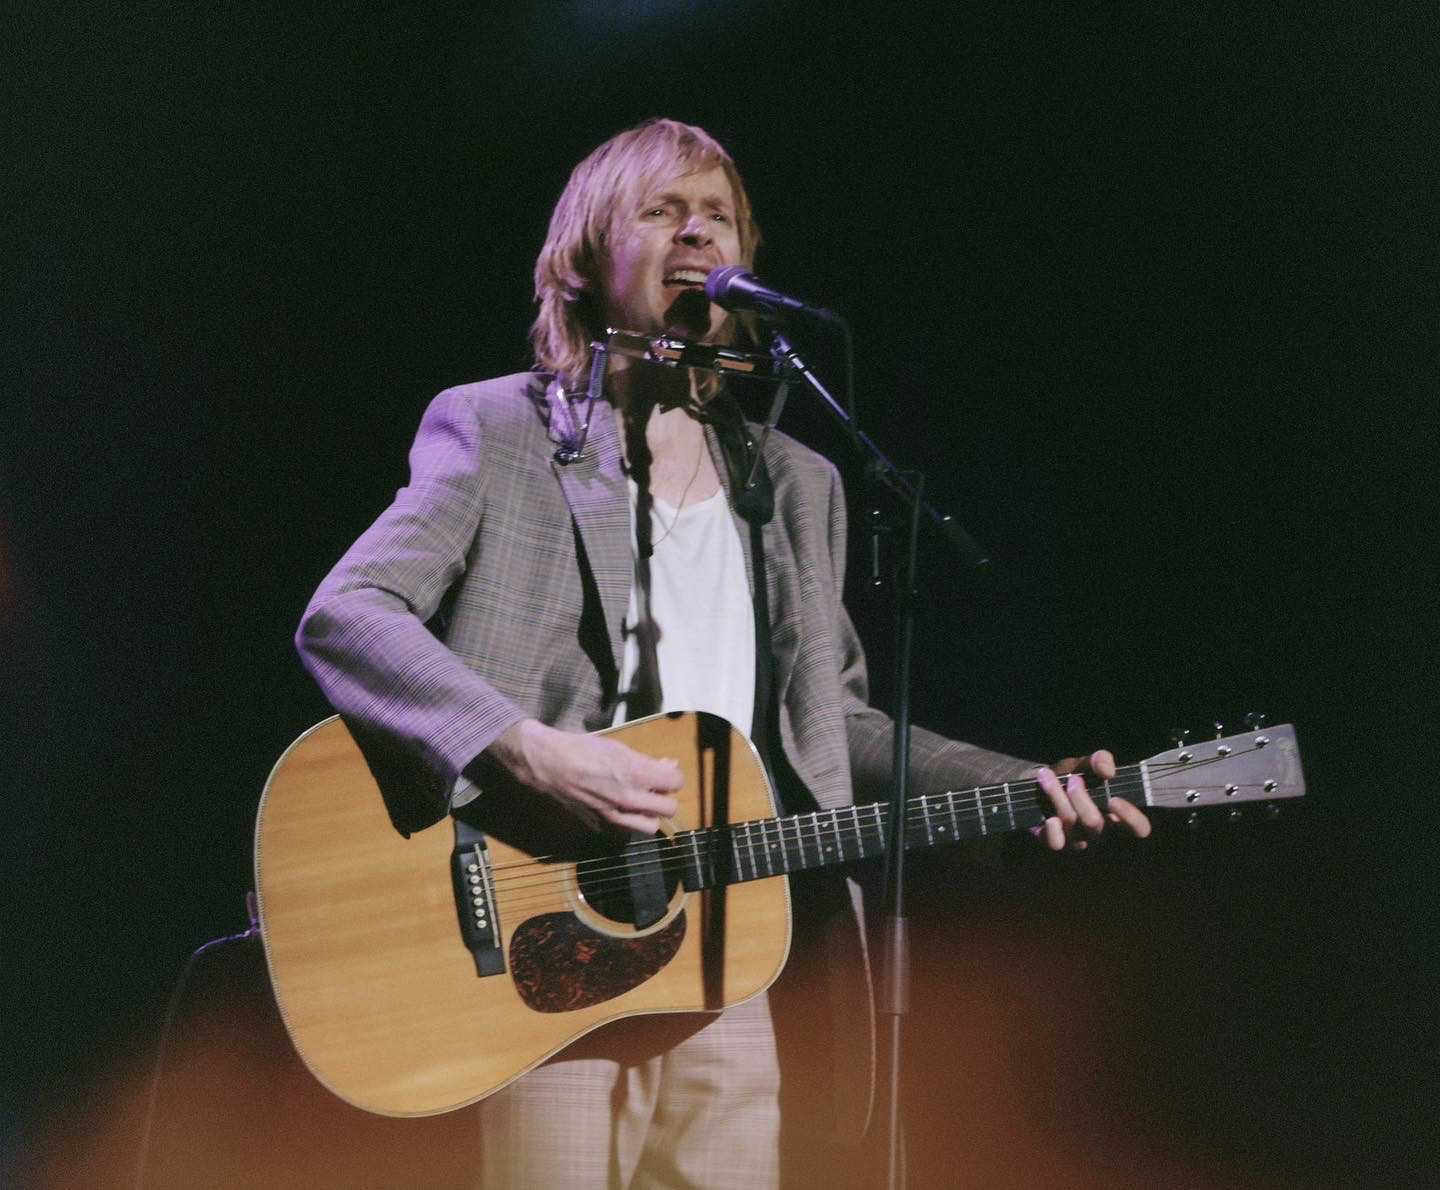 Photos: SXSW Beck Acoustic Set at ACL Live